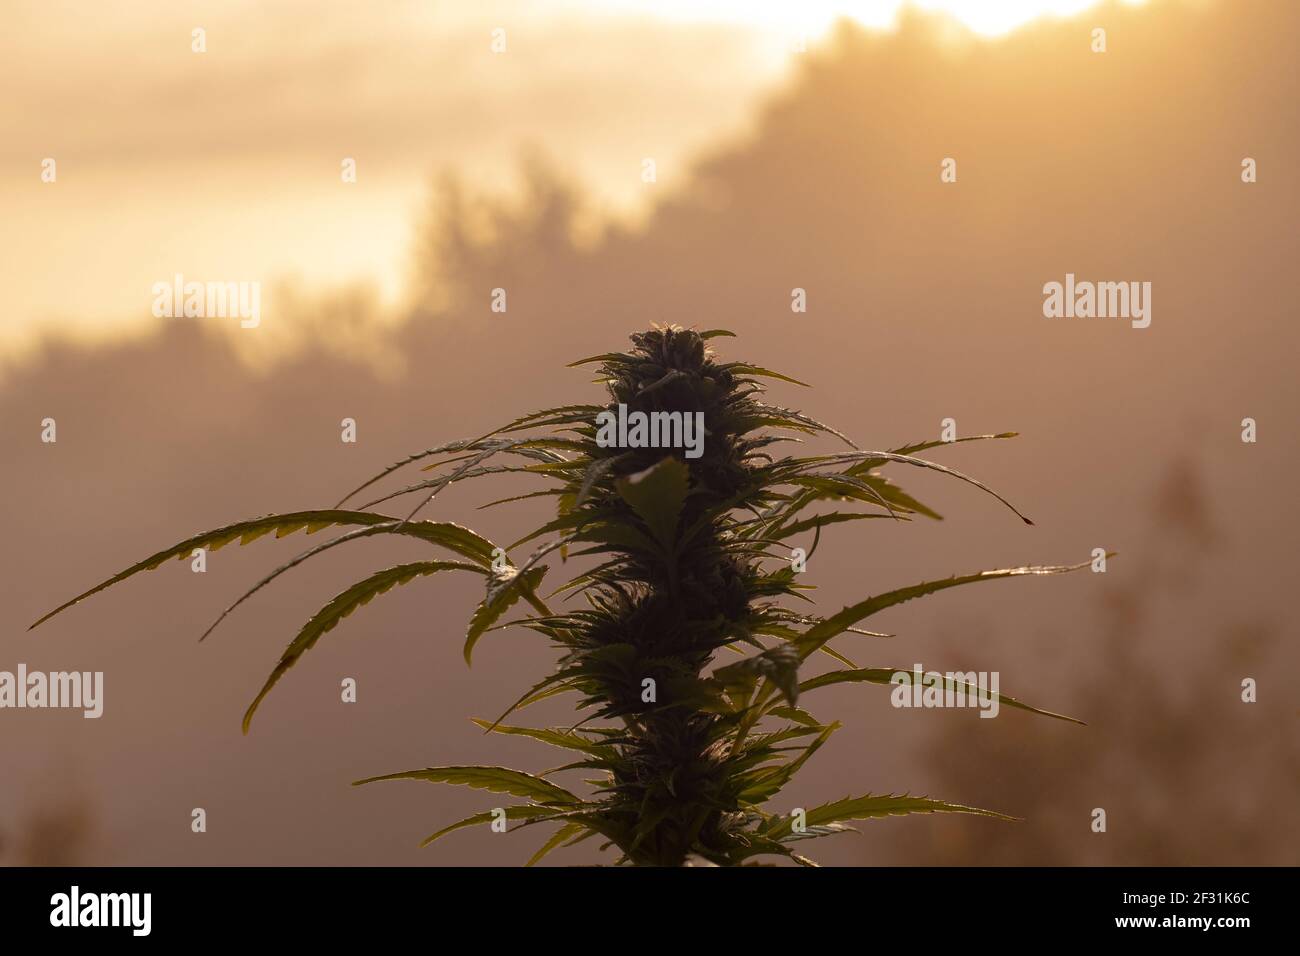 Cannabis plant at flowering stage growing outdoors Stock Photo